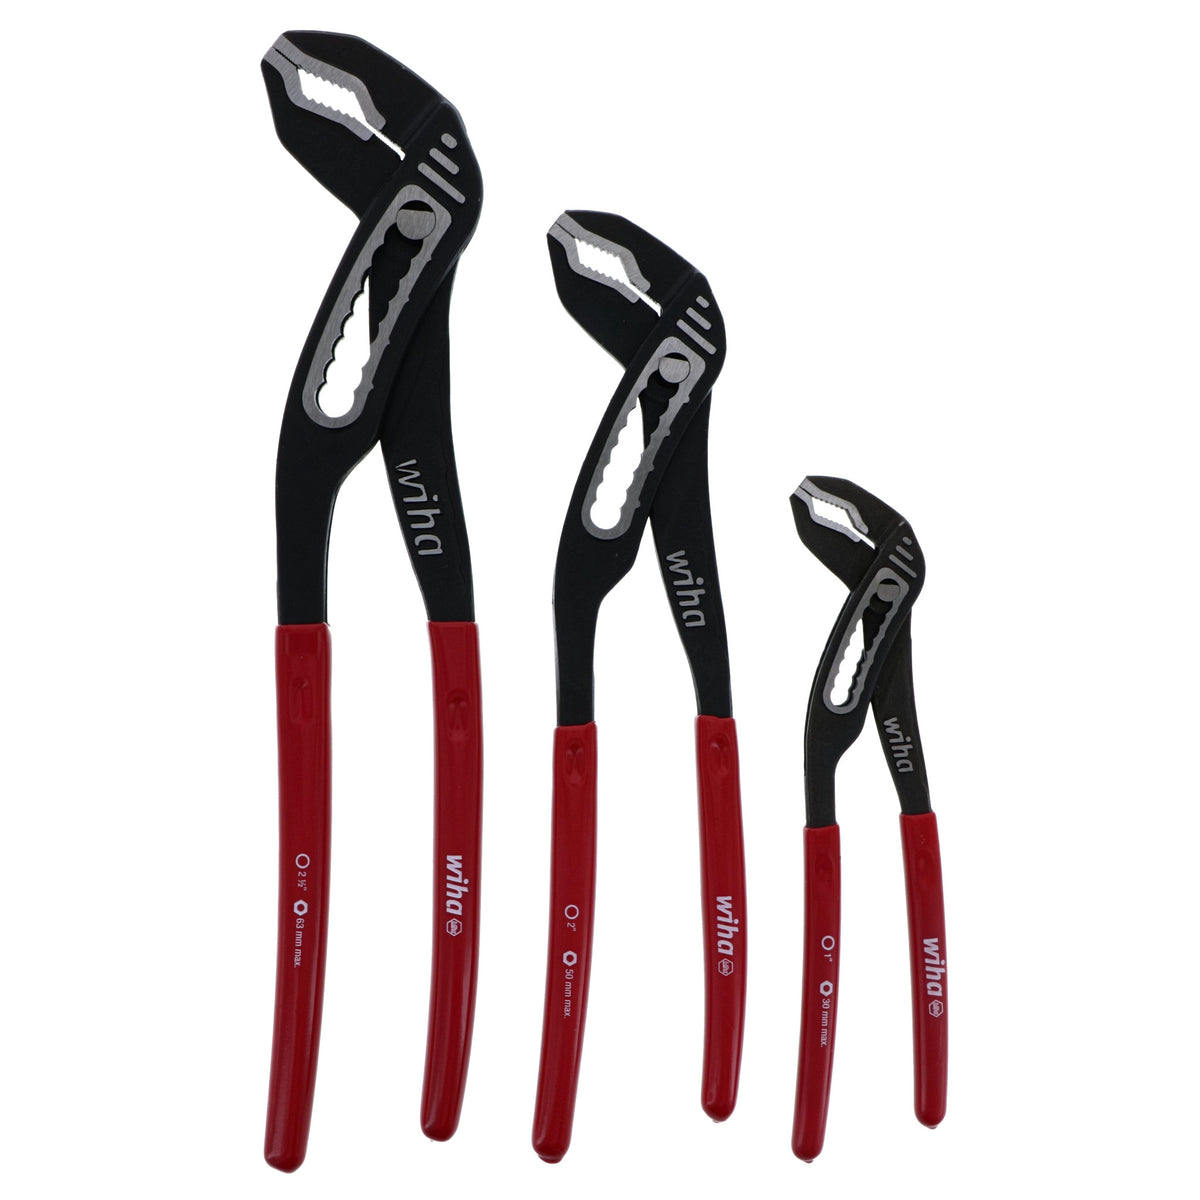 Wiha 32670 3 Piece Classic Grip V-Jaw Tongue and Groove Pliers Set